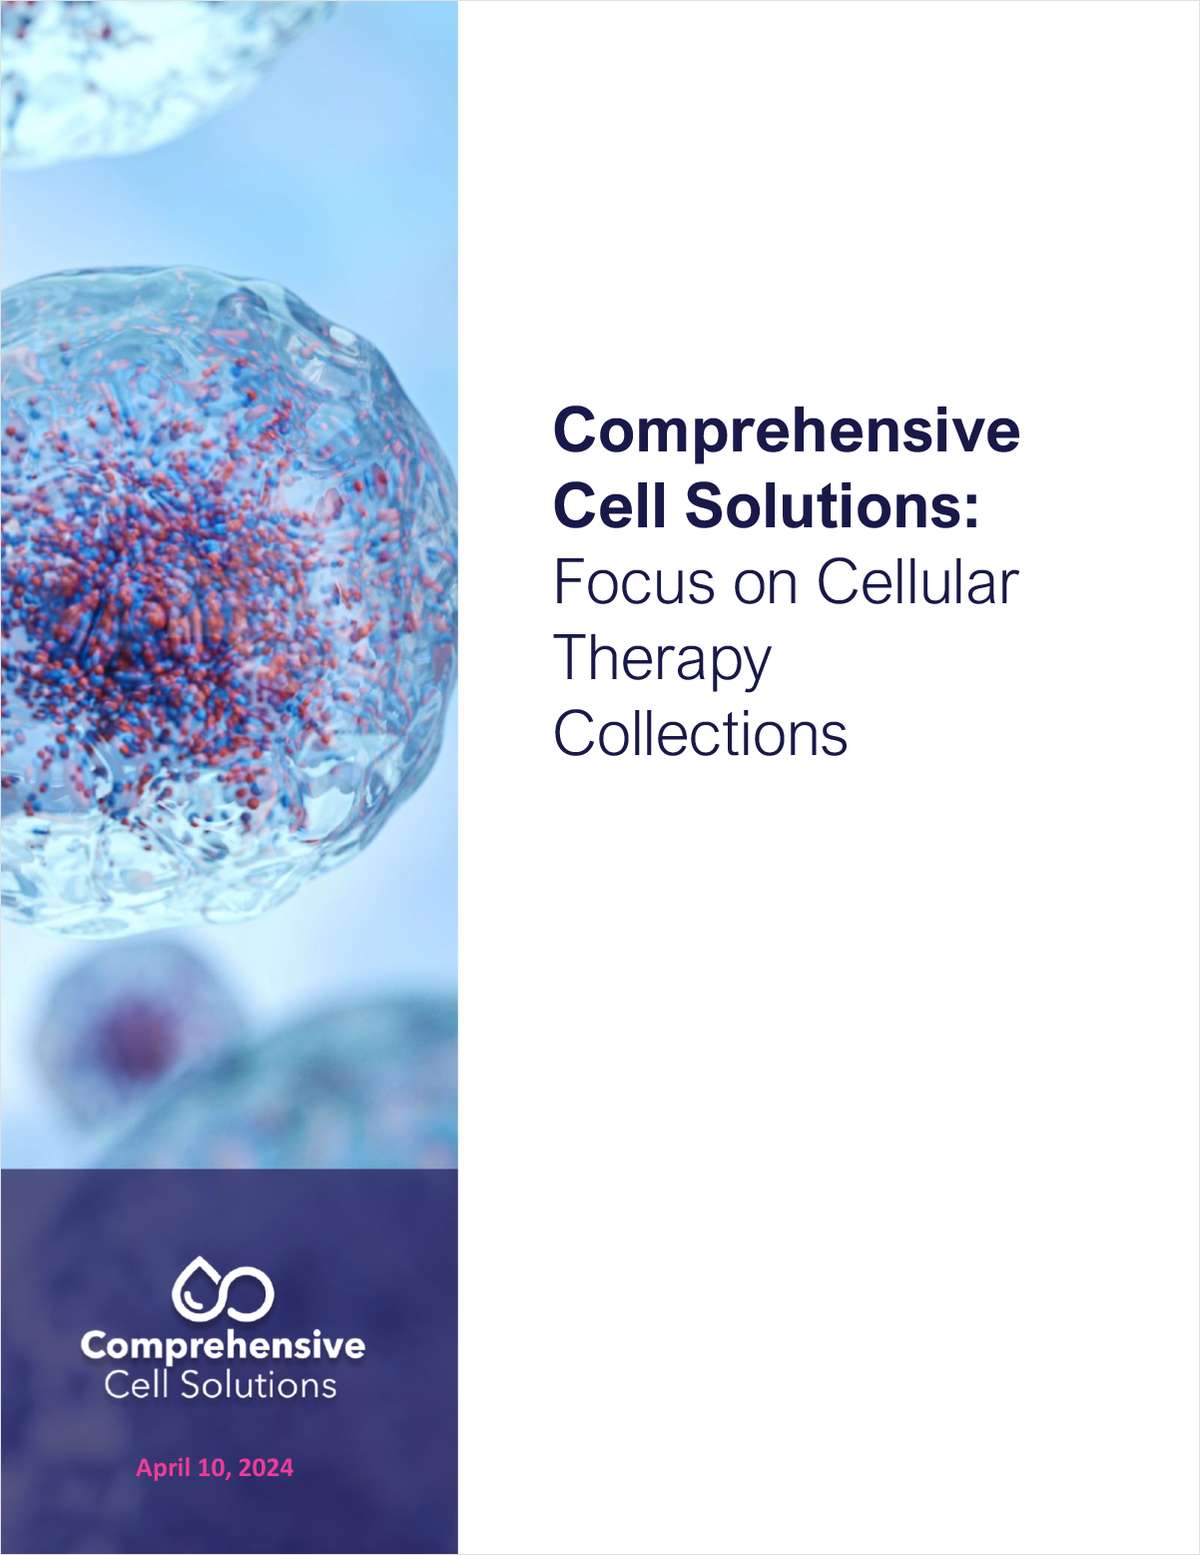 Comprehensive Cell Solutions: Focus on Cellular Therapy Collections